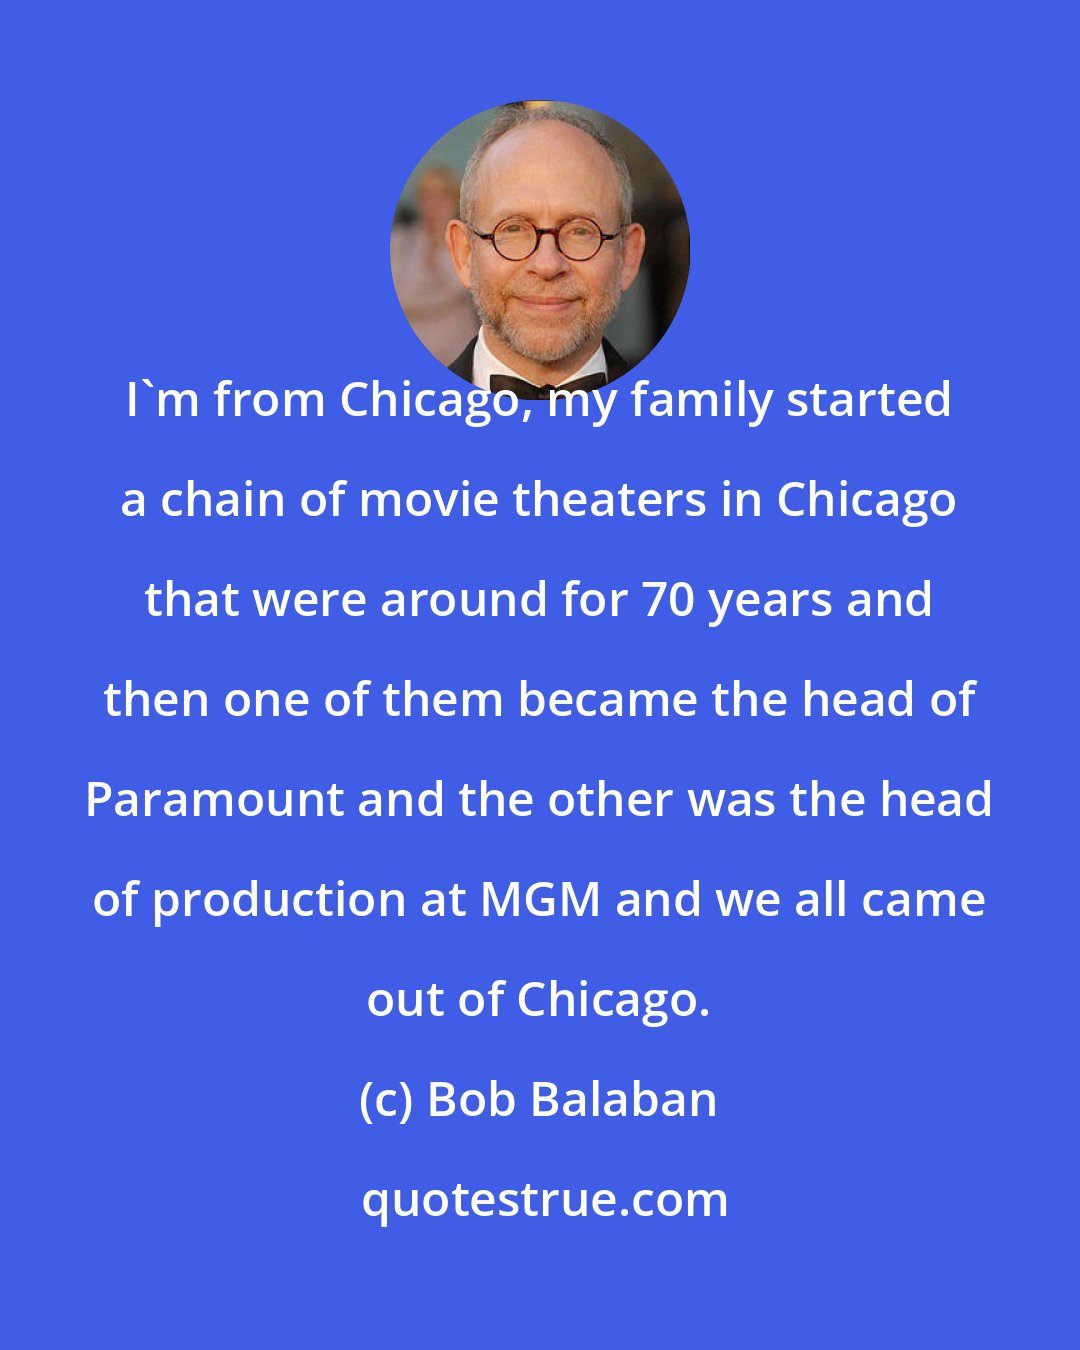 Bob Balaban: I'm from Chicago, my family started a chain of movie theaters in Chicago that were around for 70 years and then one of them became the head of Paramount and the other was the head of production at MGM and we all came out of Chicago.